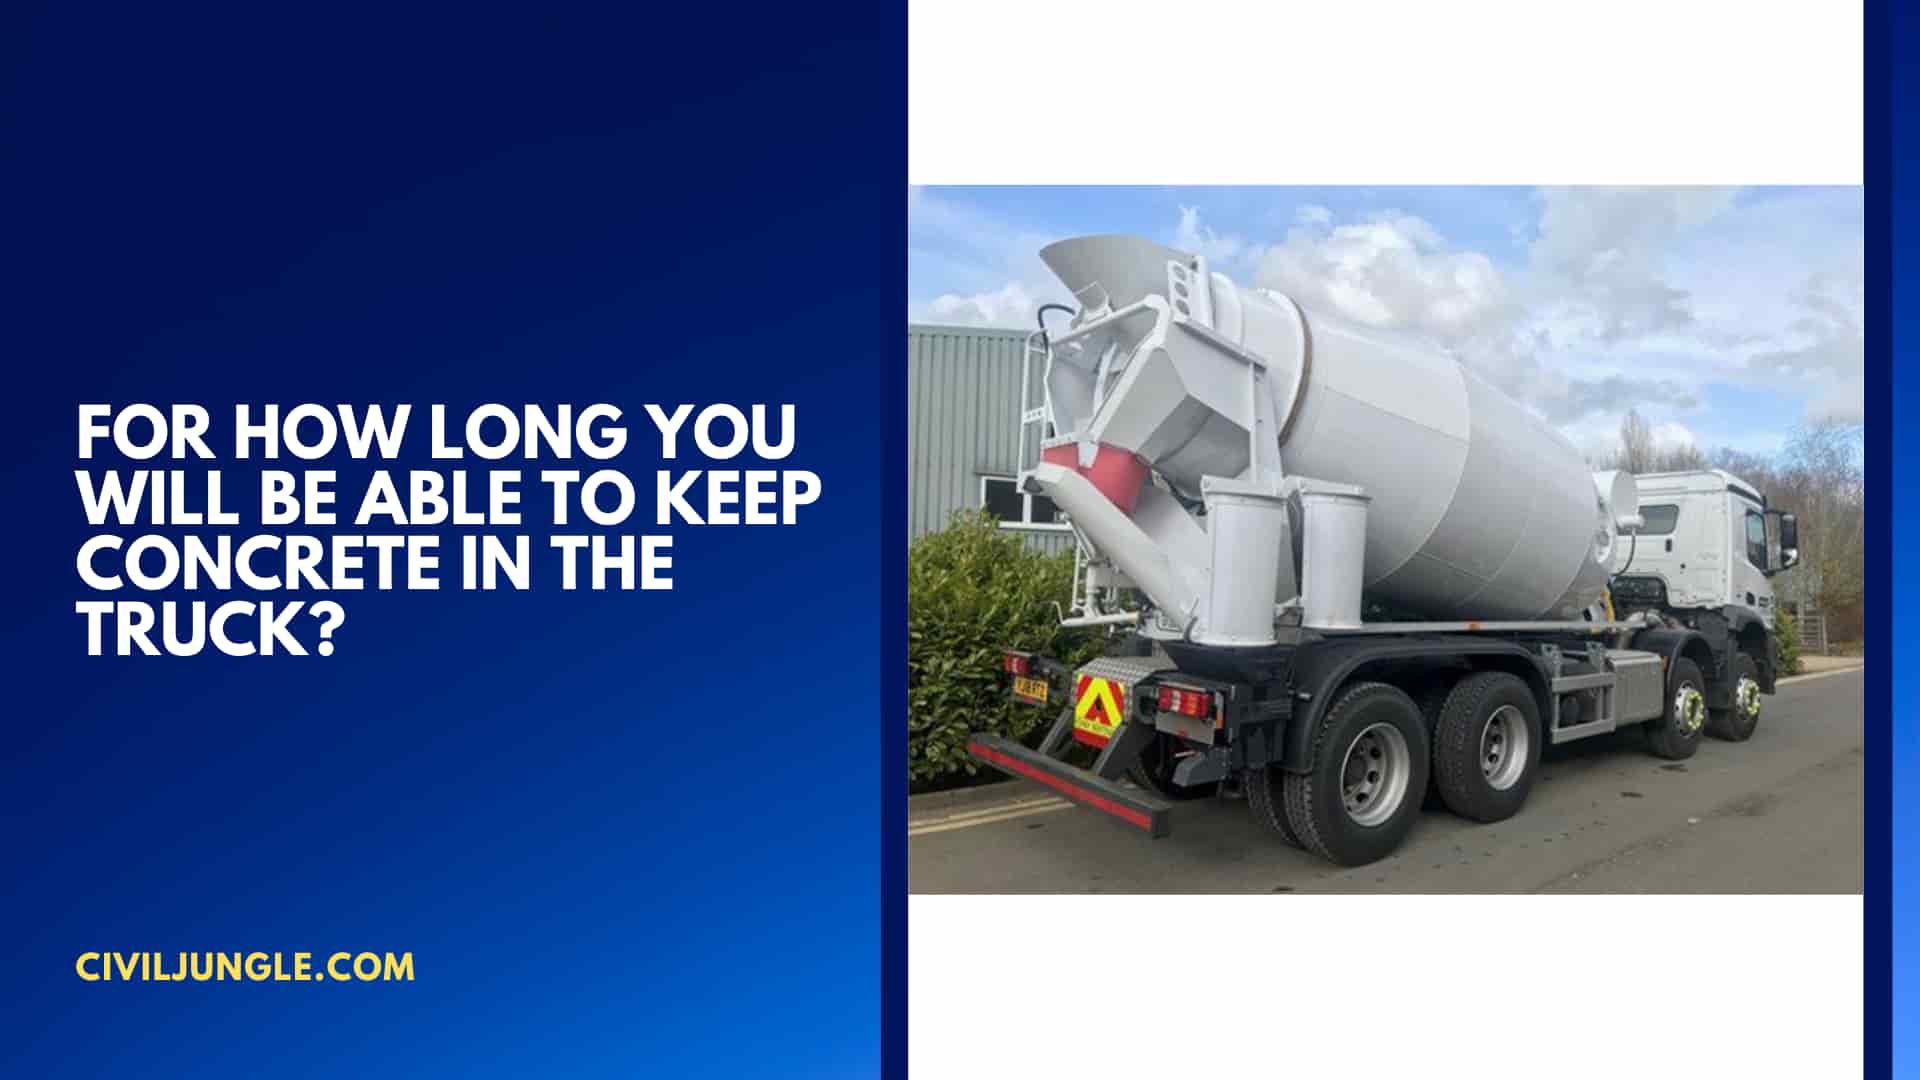 For How Long You Will Be Able to Keep Concrete in The Truck?